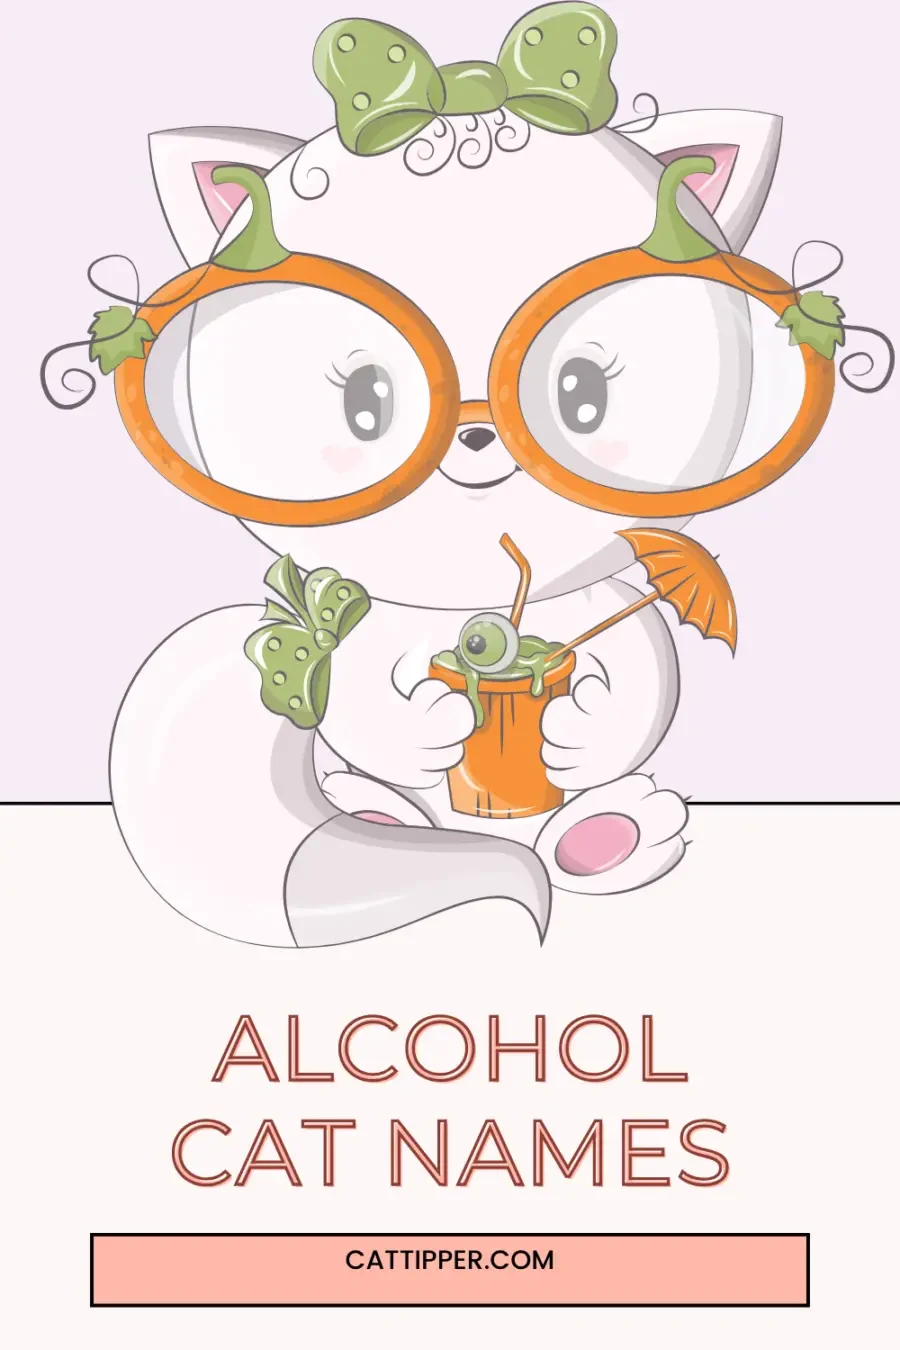 cartoon of cat holding a cocktail with words Alcohol Names for Cats at bottom of image